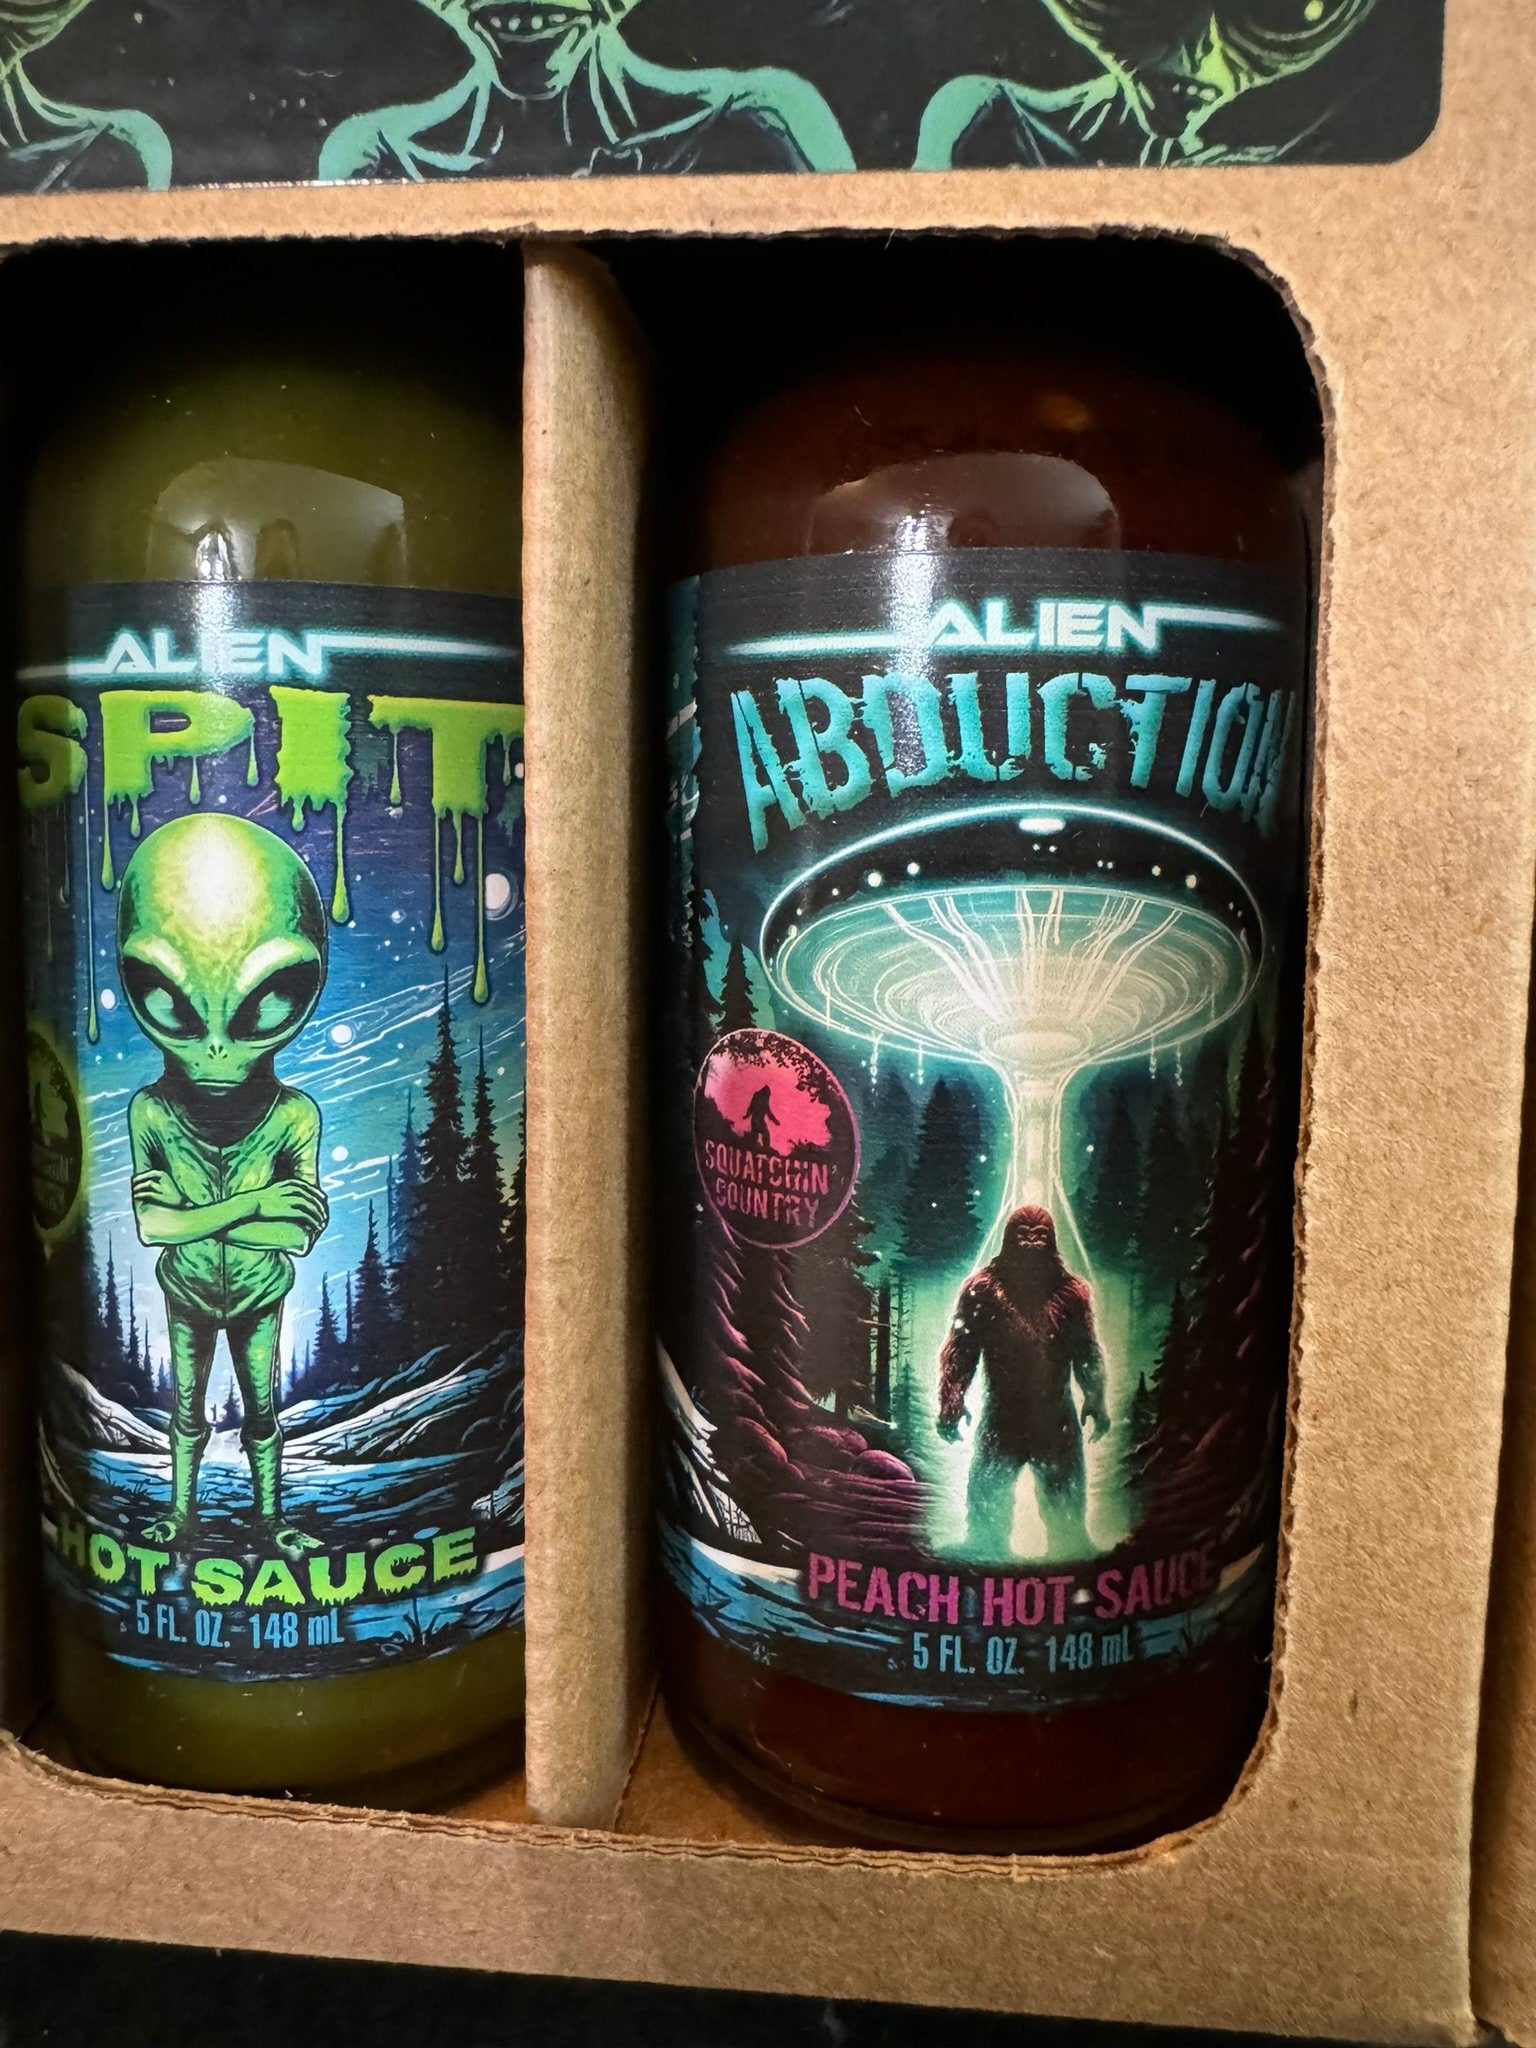 Alien Hot Sauce 2 pack Gift set from Squatchin' Country